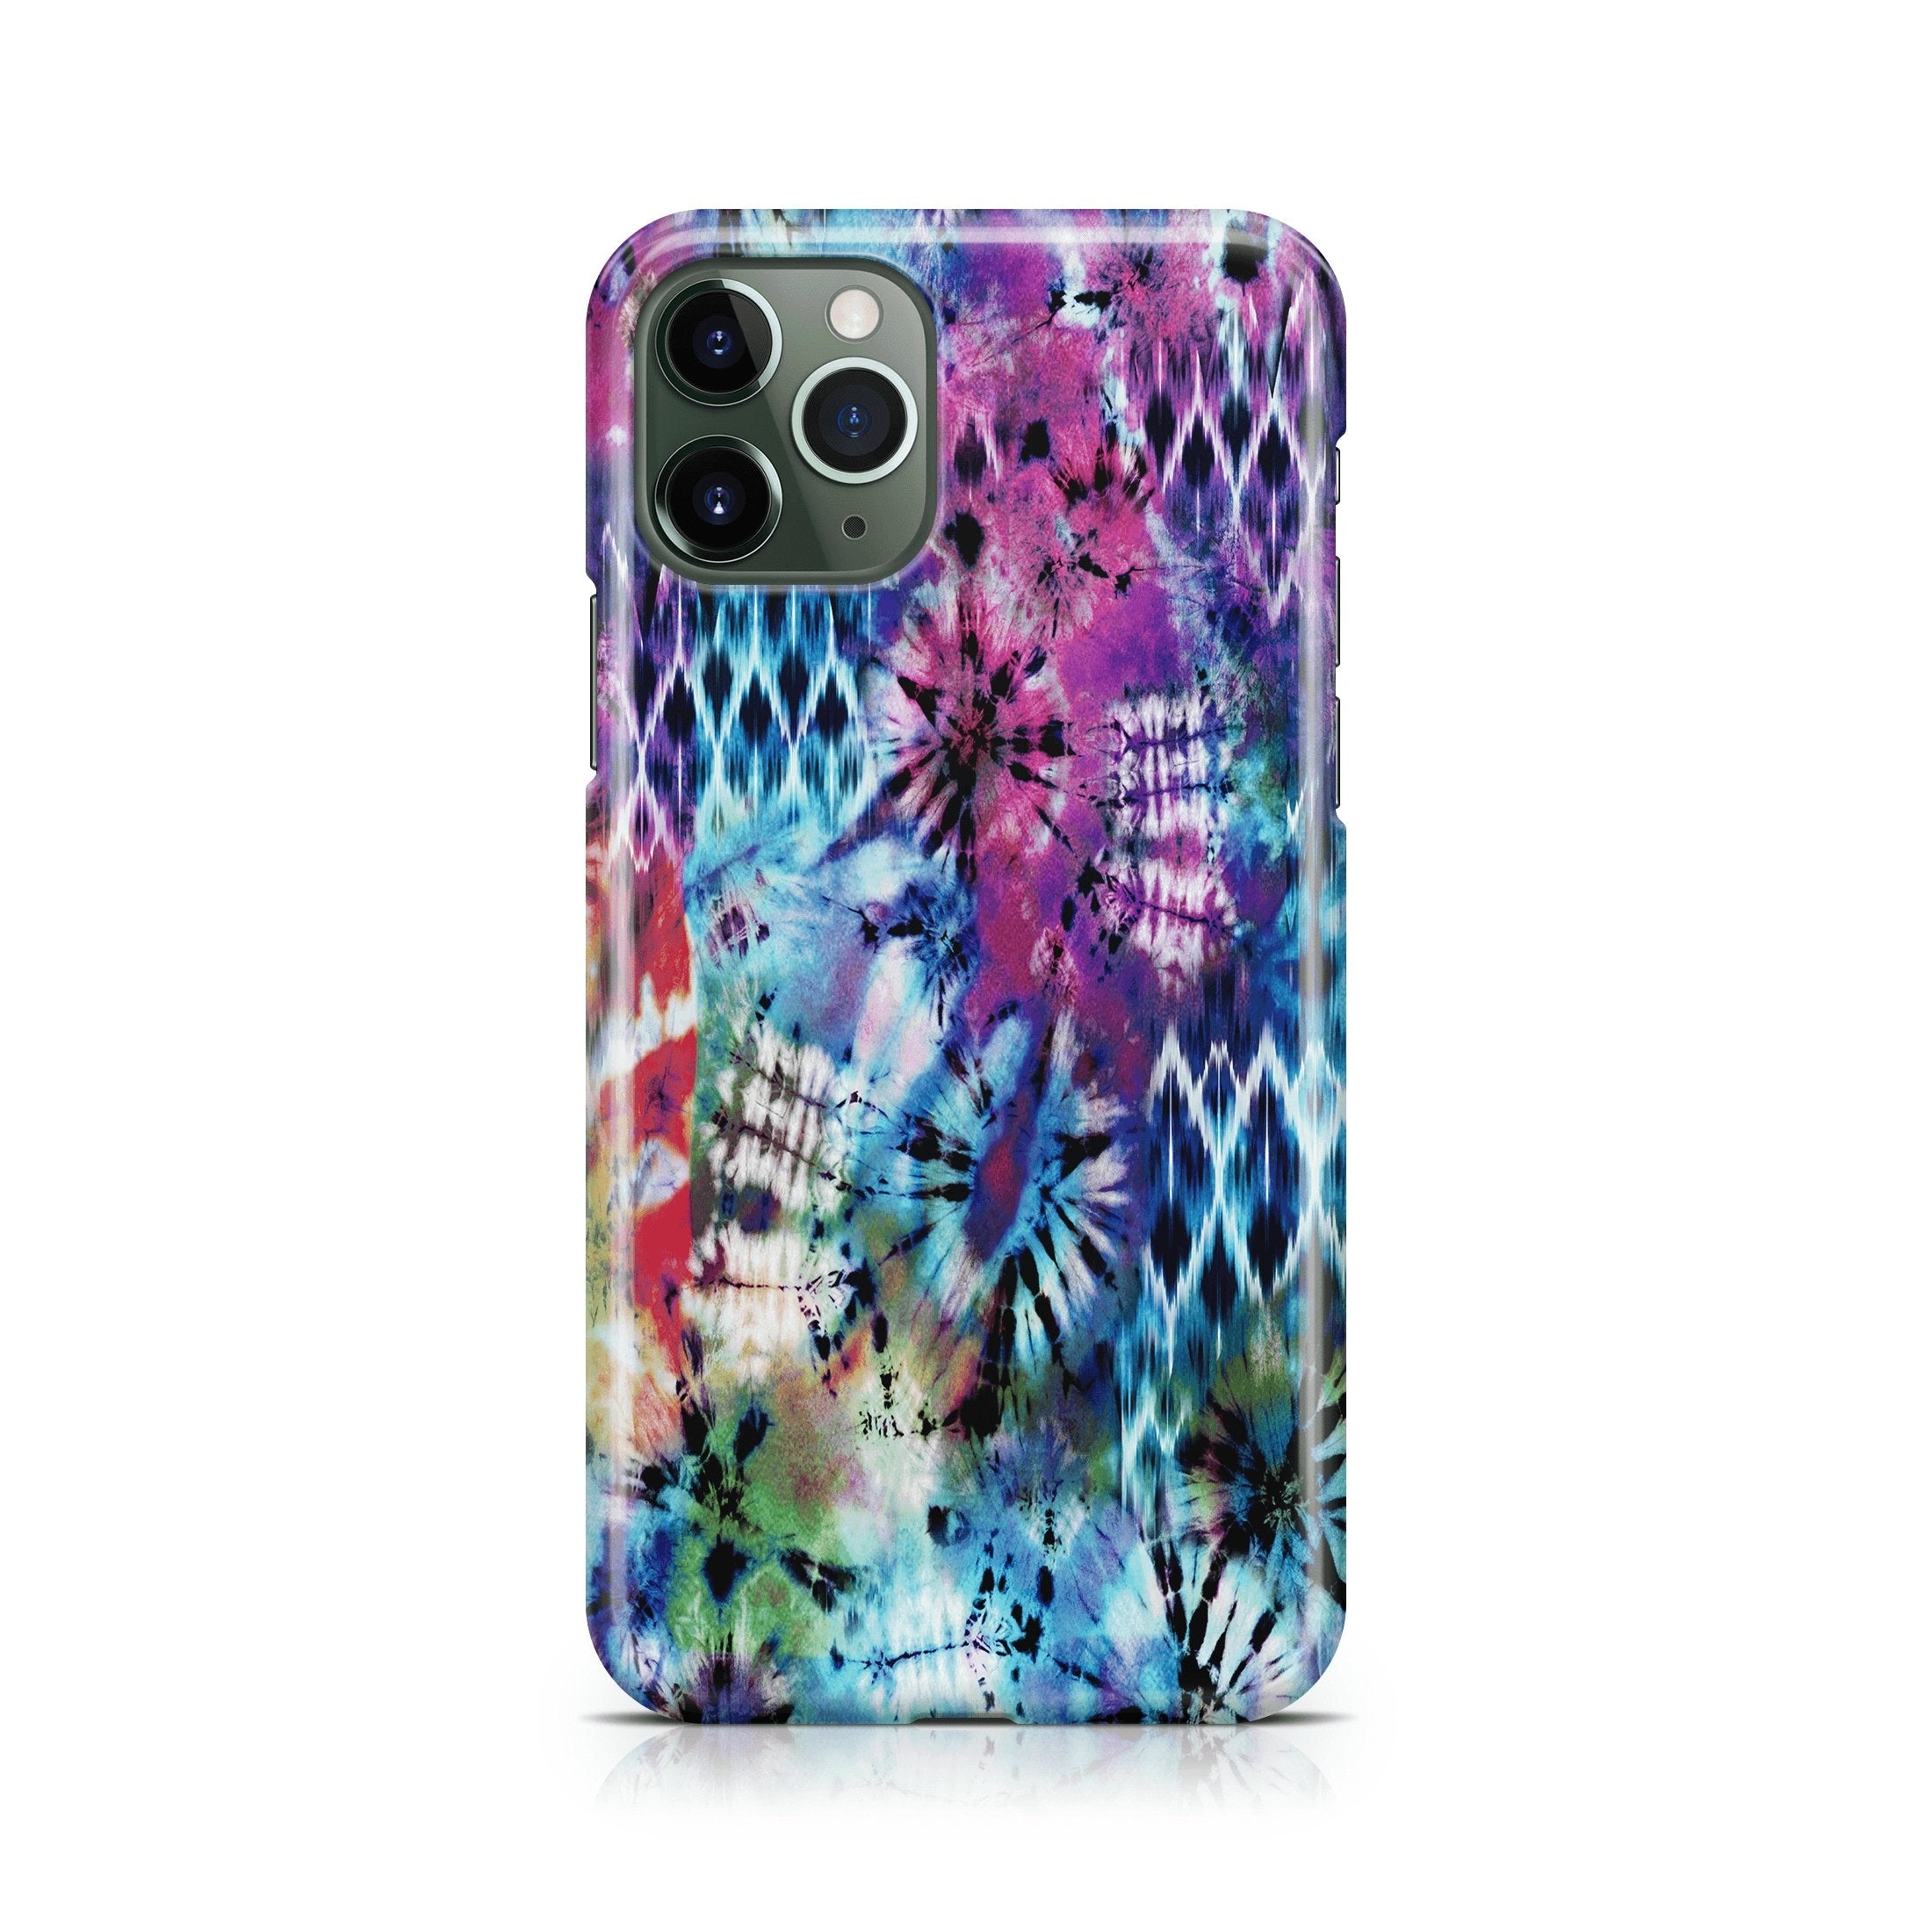 Chaos Tie Dye - iPhone phone case designs by CaseSwagger